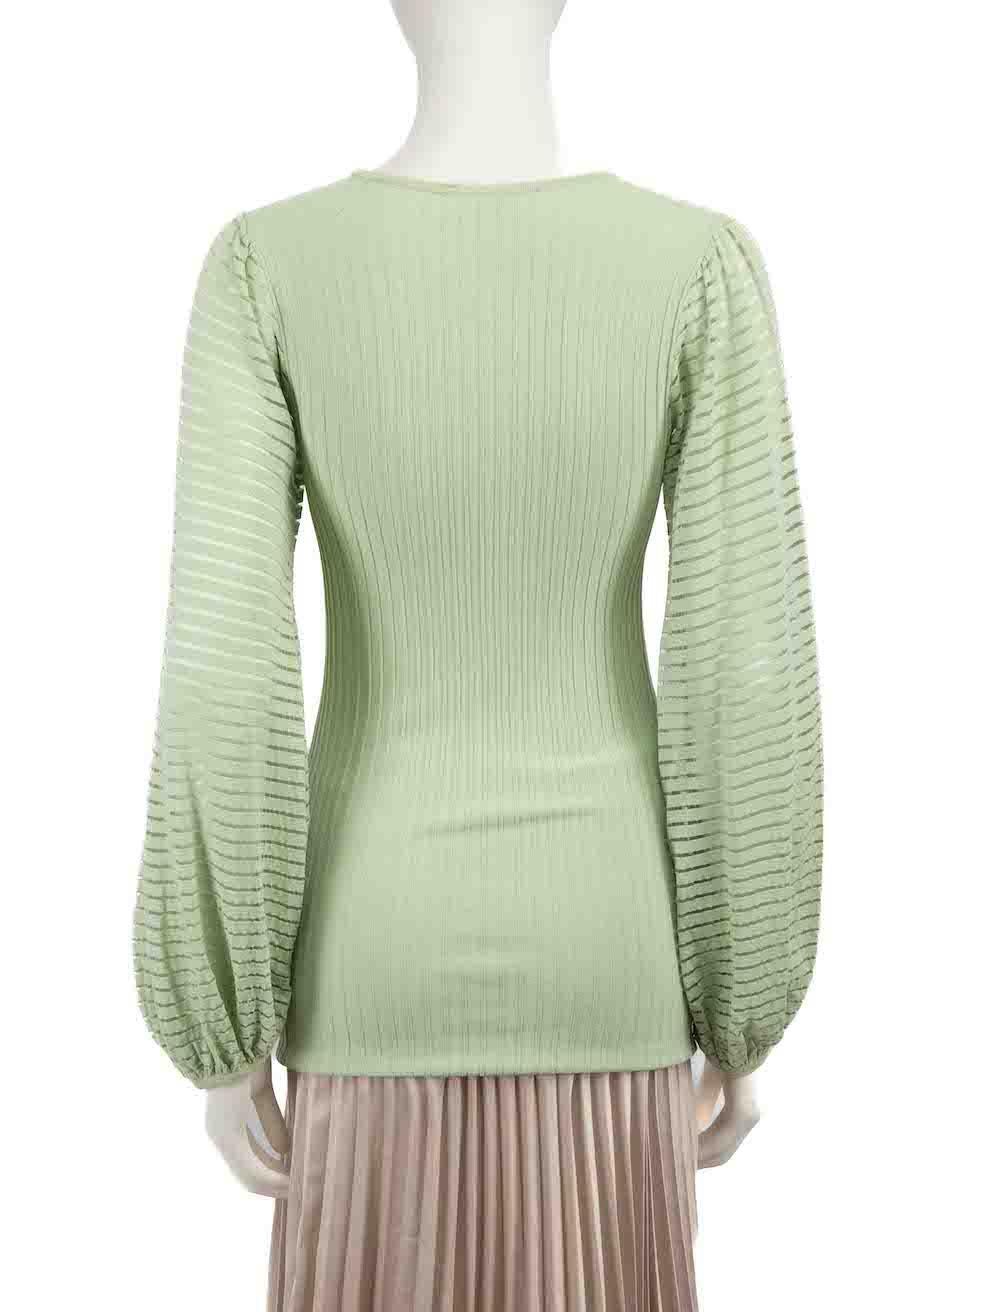 Roksanda Green Striped Texture Top Size S In Good Condition For Sale In London, GB